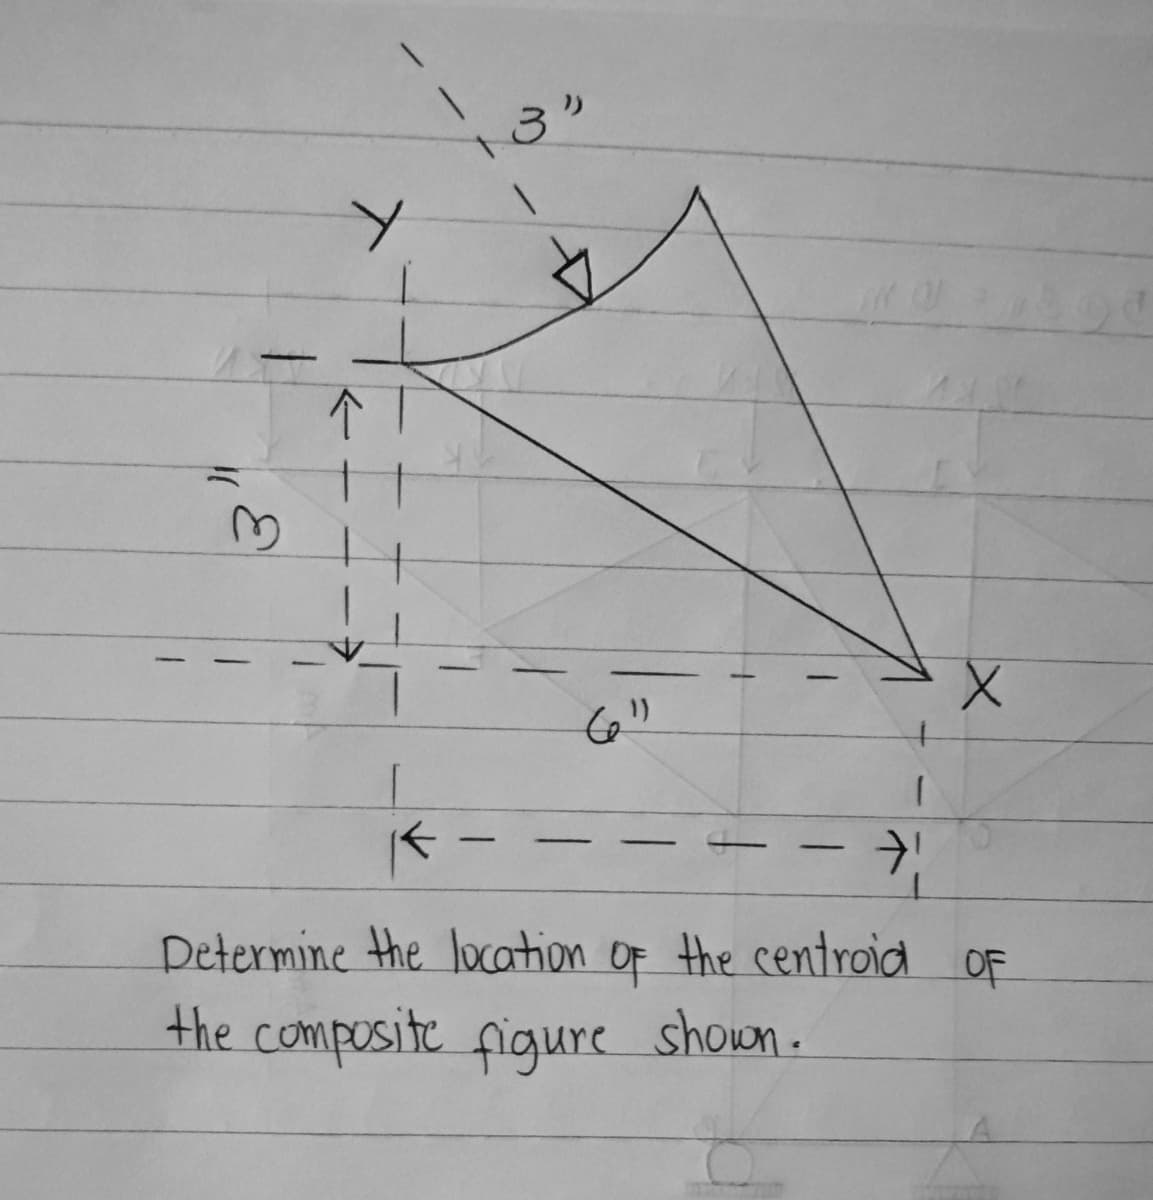 X.
|
-
Determine the location oF the centroid oF
the composite figure shown.
